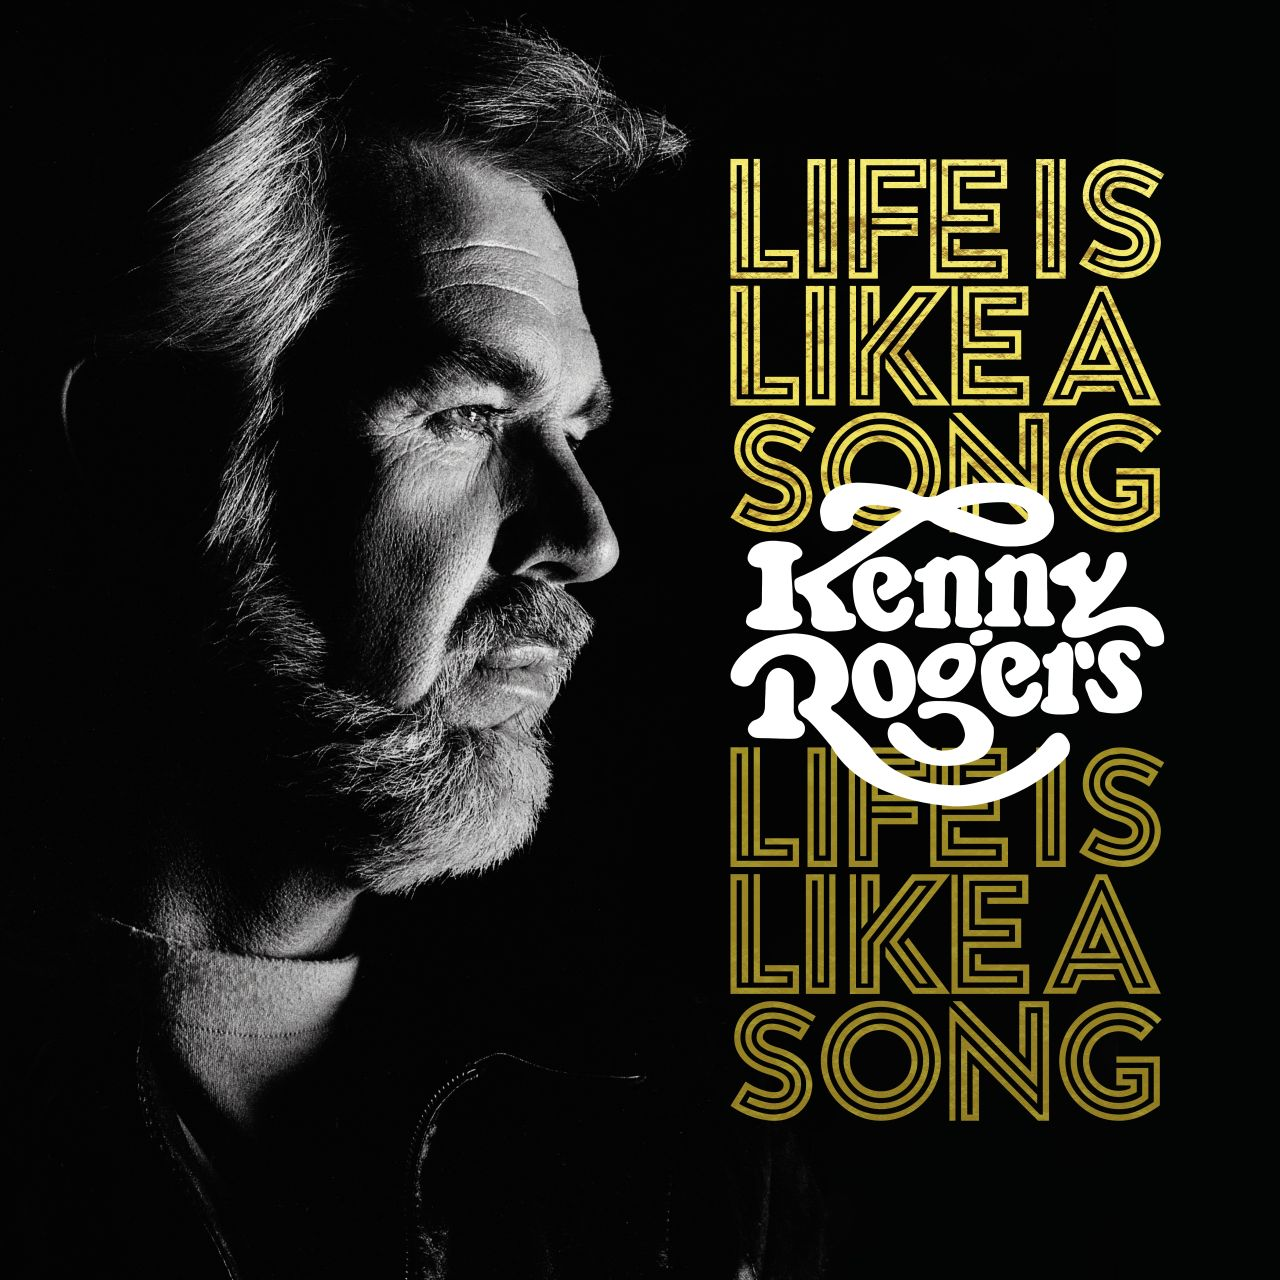 Song Life Kenny Like Is - (Vinyl) Rogers (1LP) - A